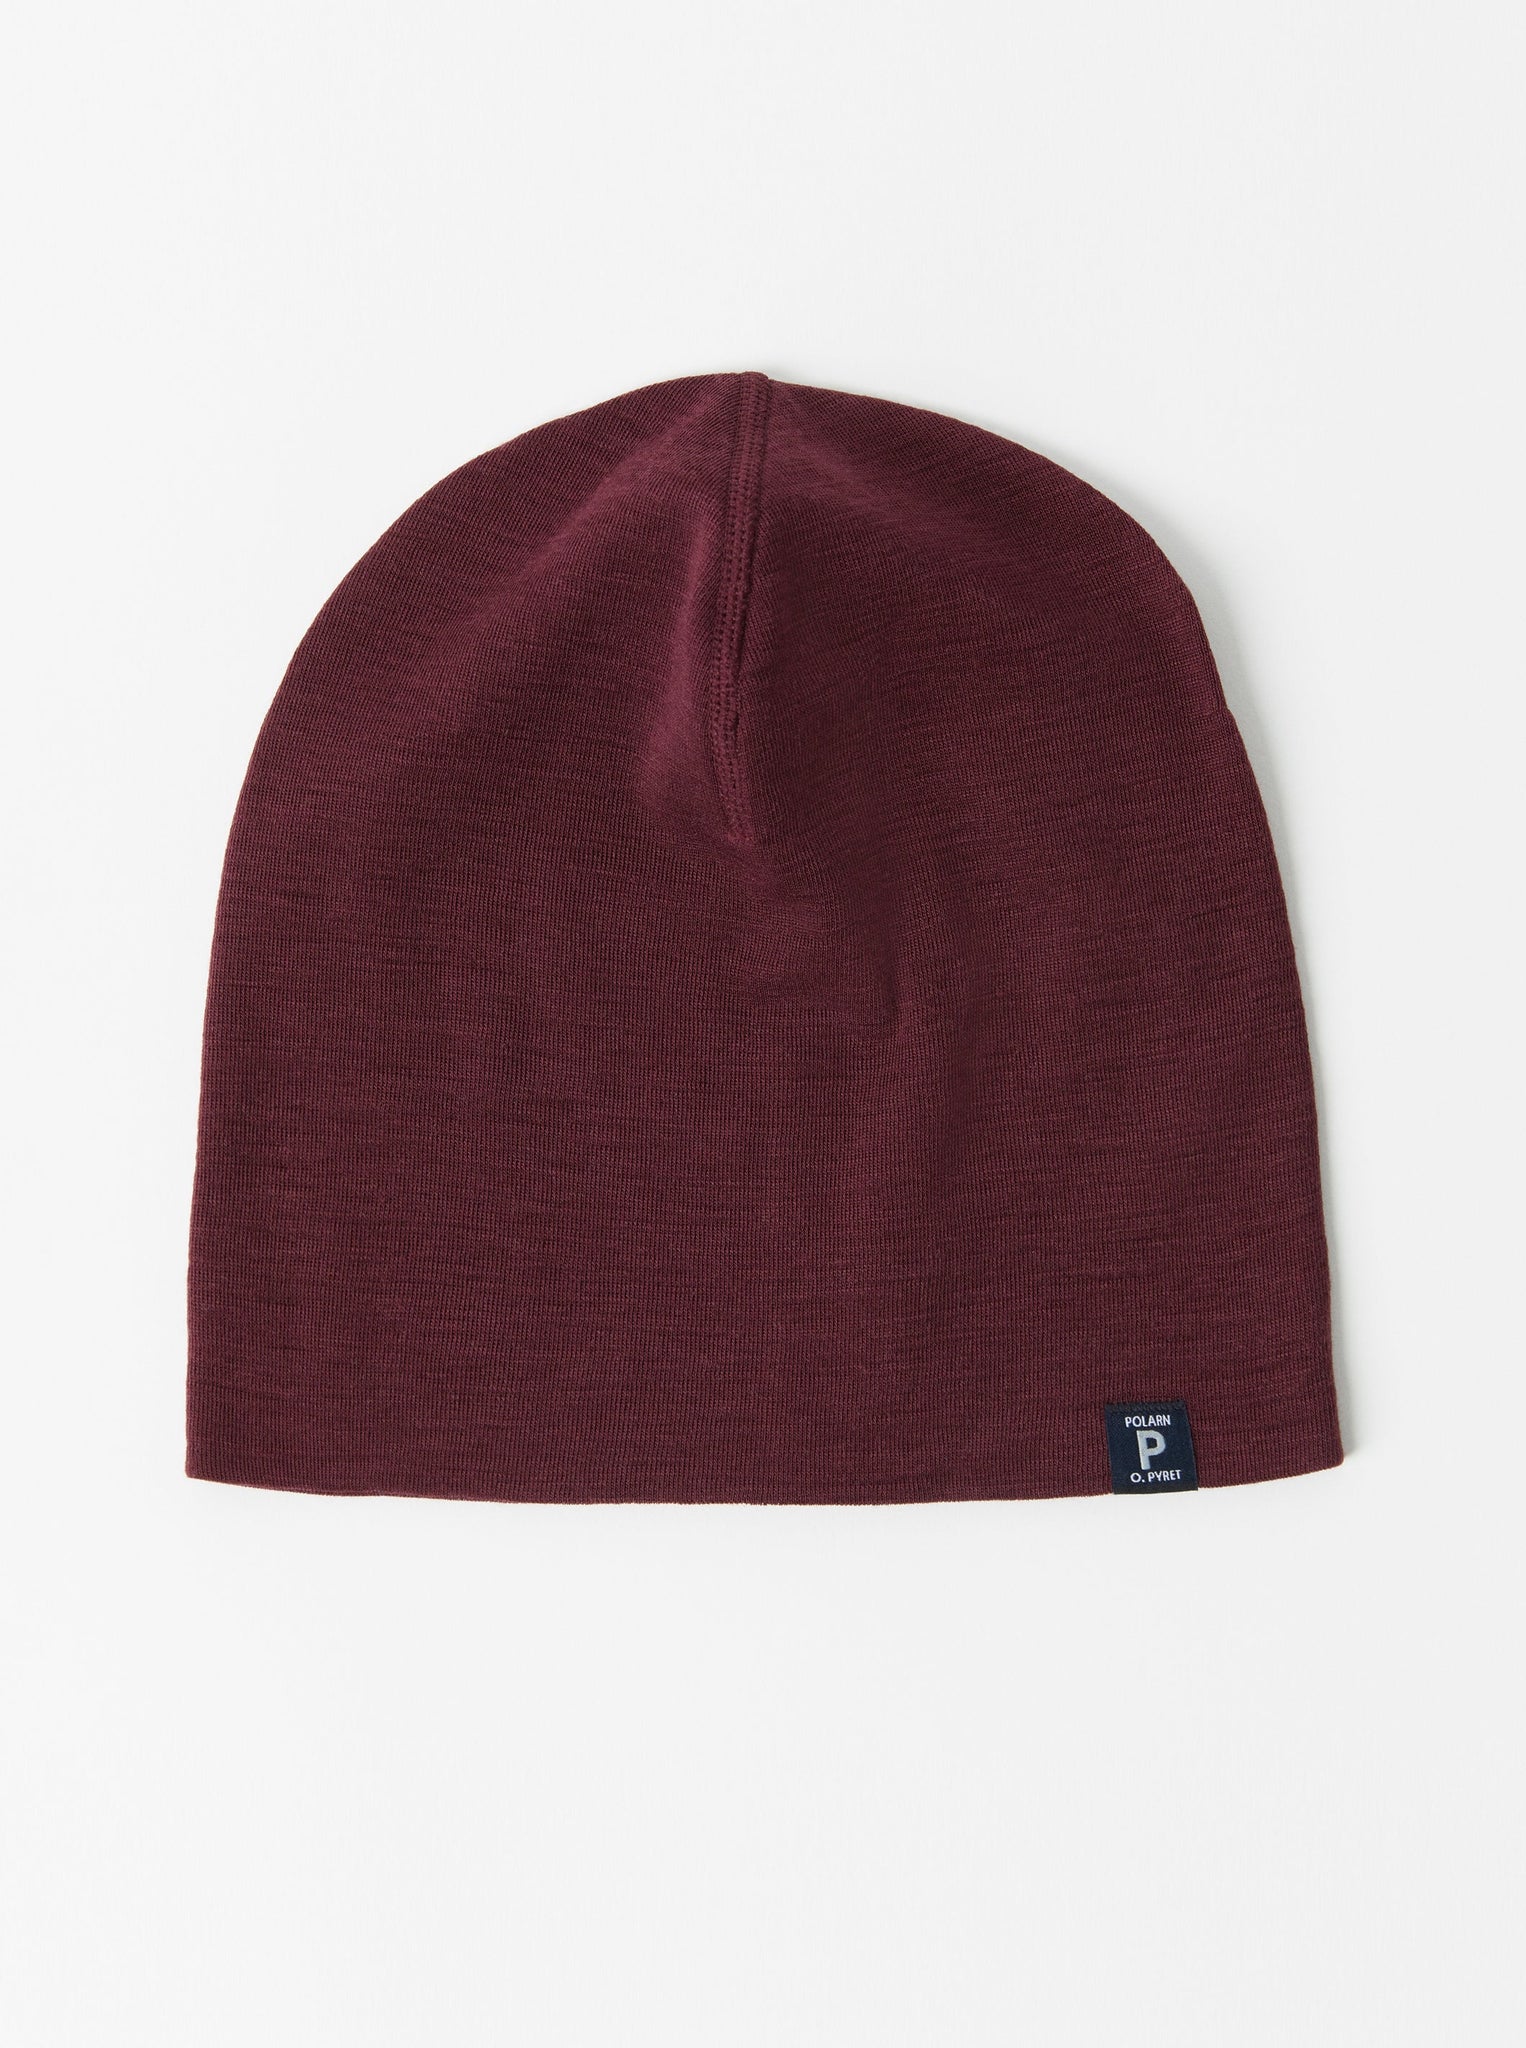 Merino Wool Burgundy Kids Beanie Hat from the Polarn O. Pyret kidswear collection. Made from sustainable sources.